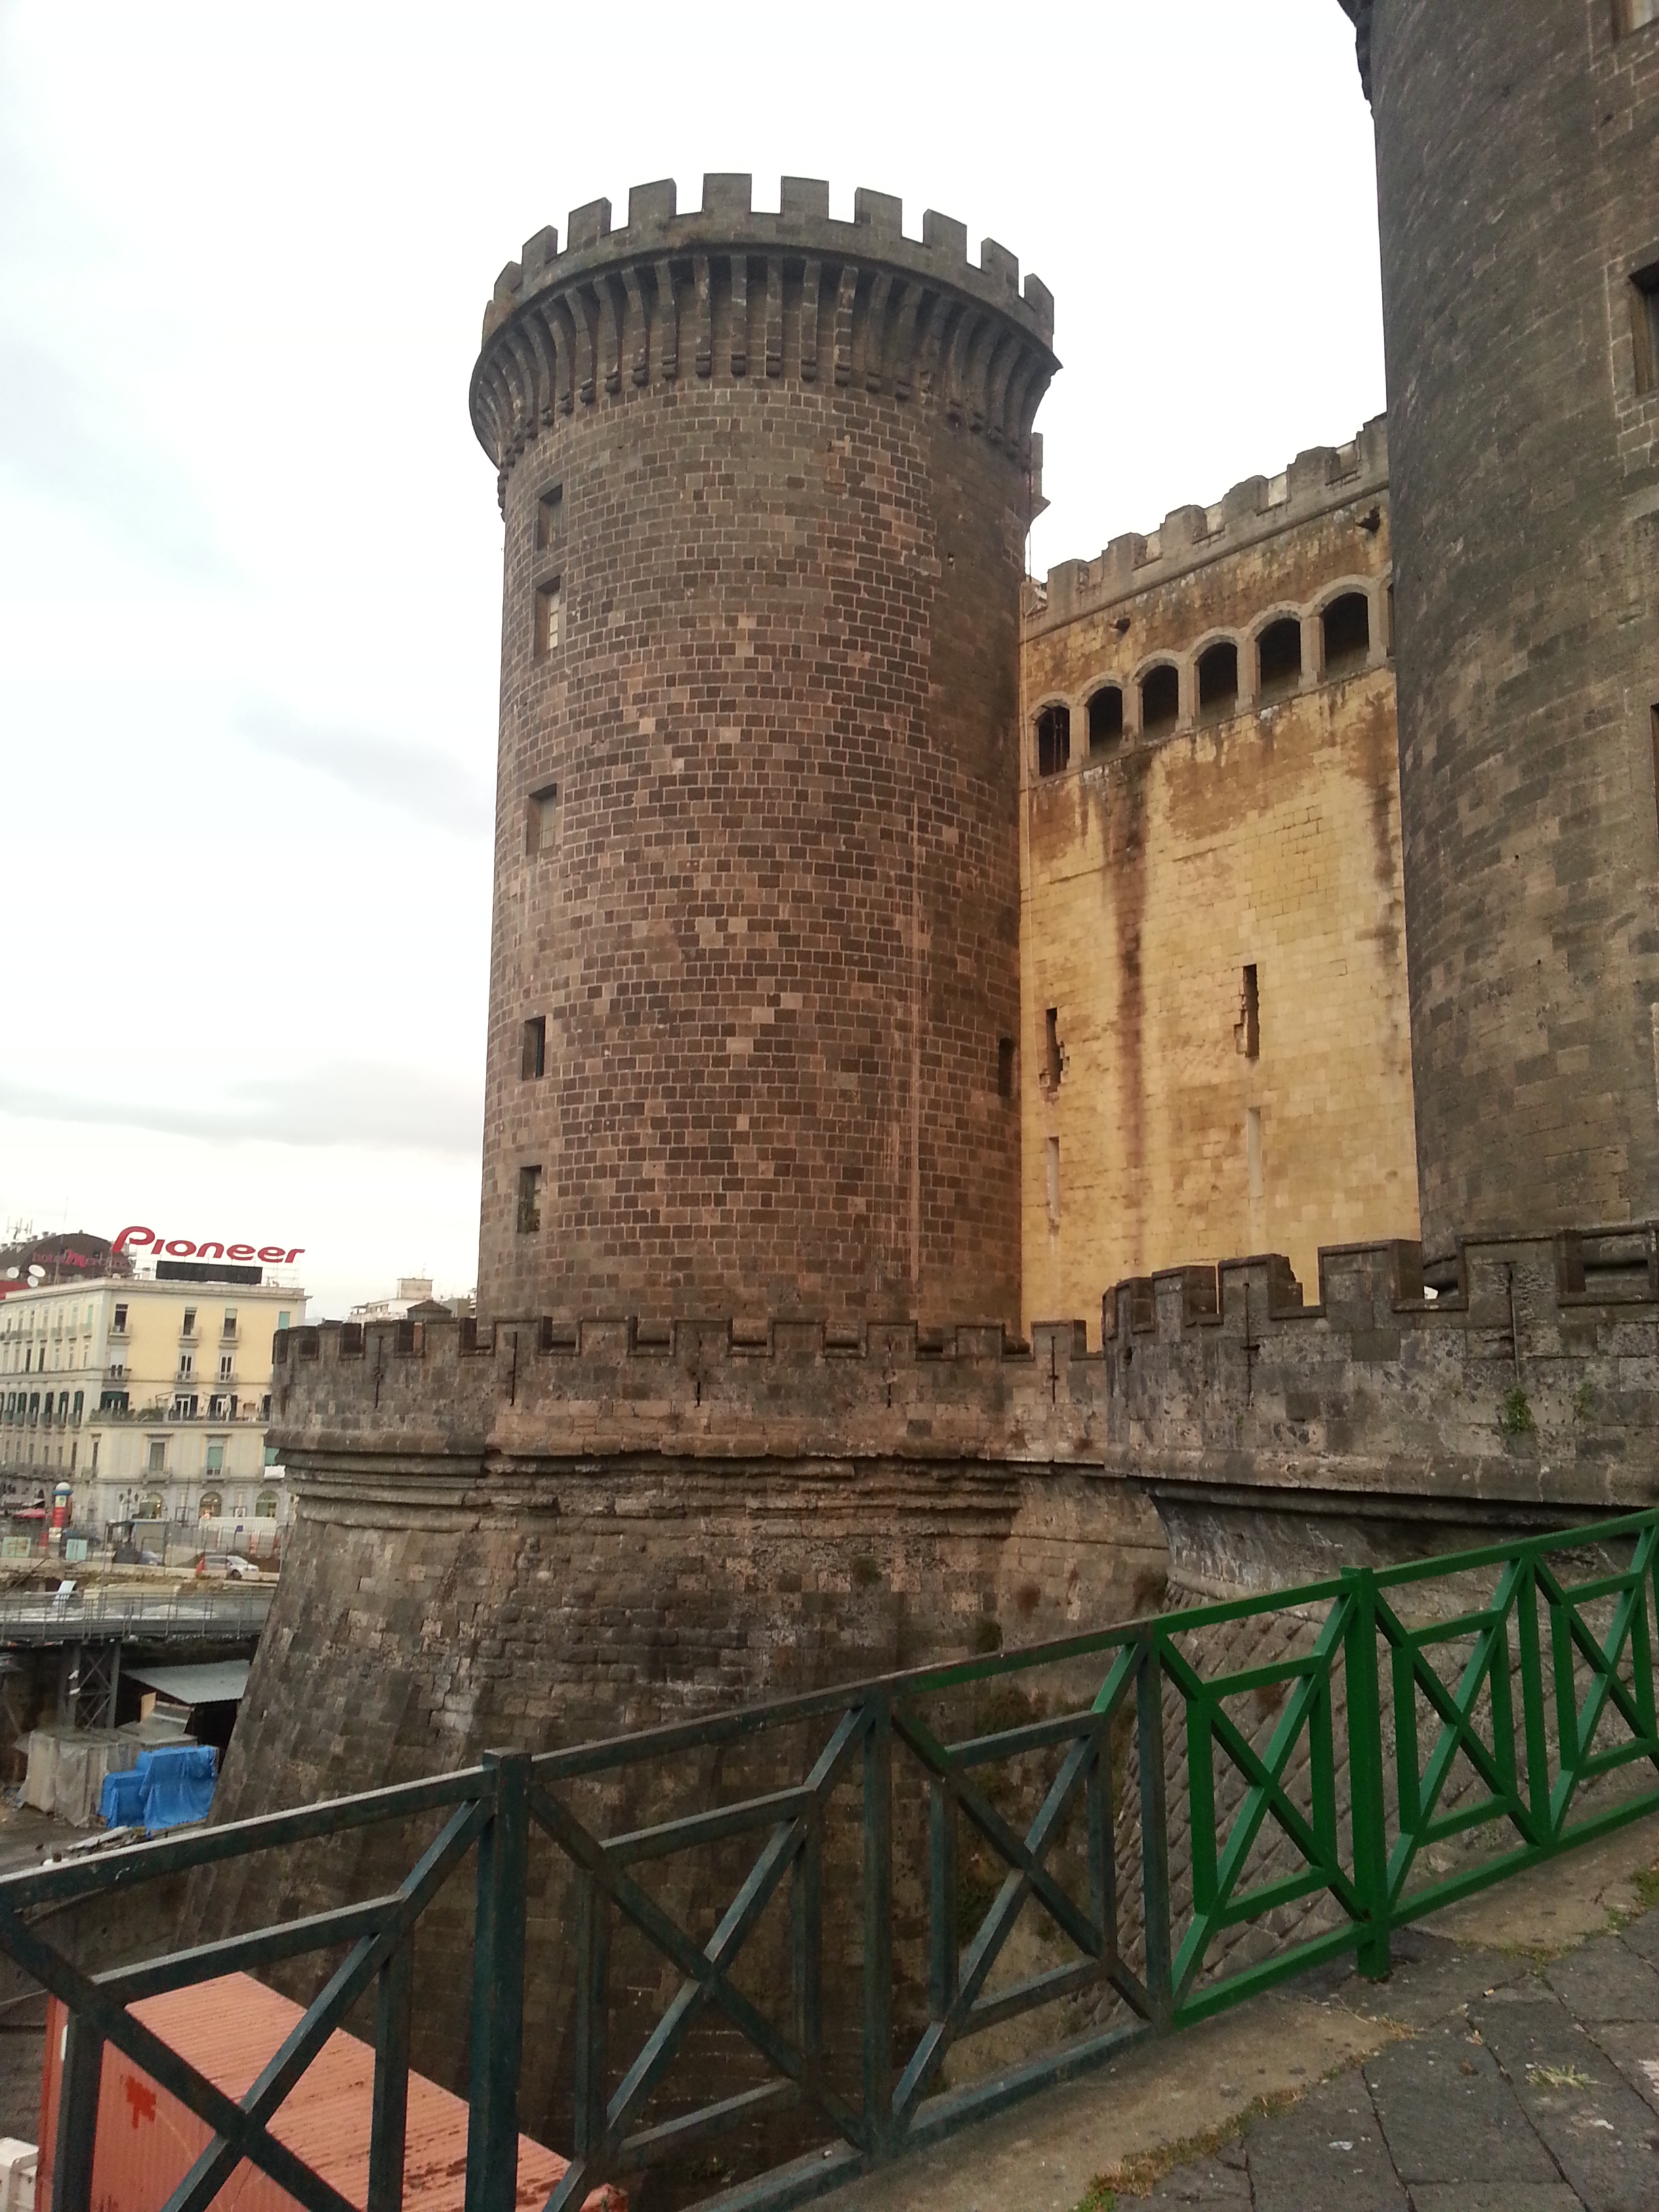 West front of the Castelnuovo, Naples. My own photograph (September 2012).